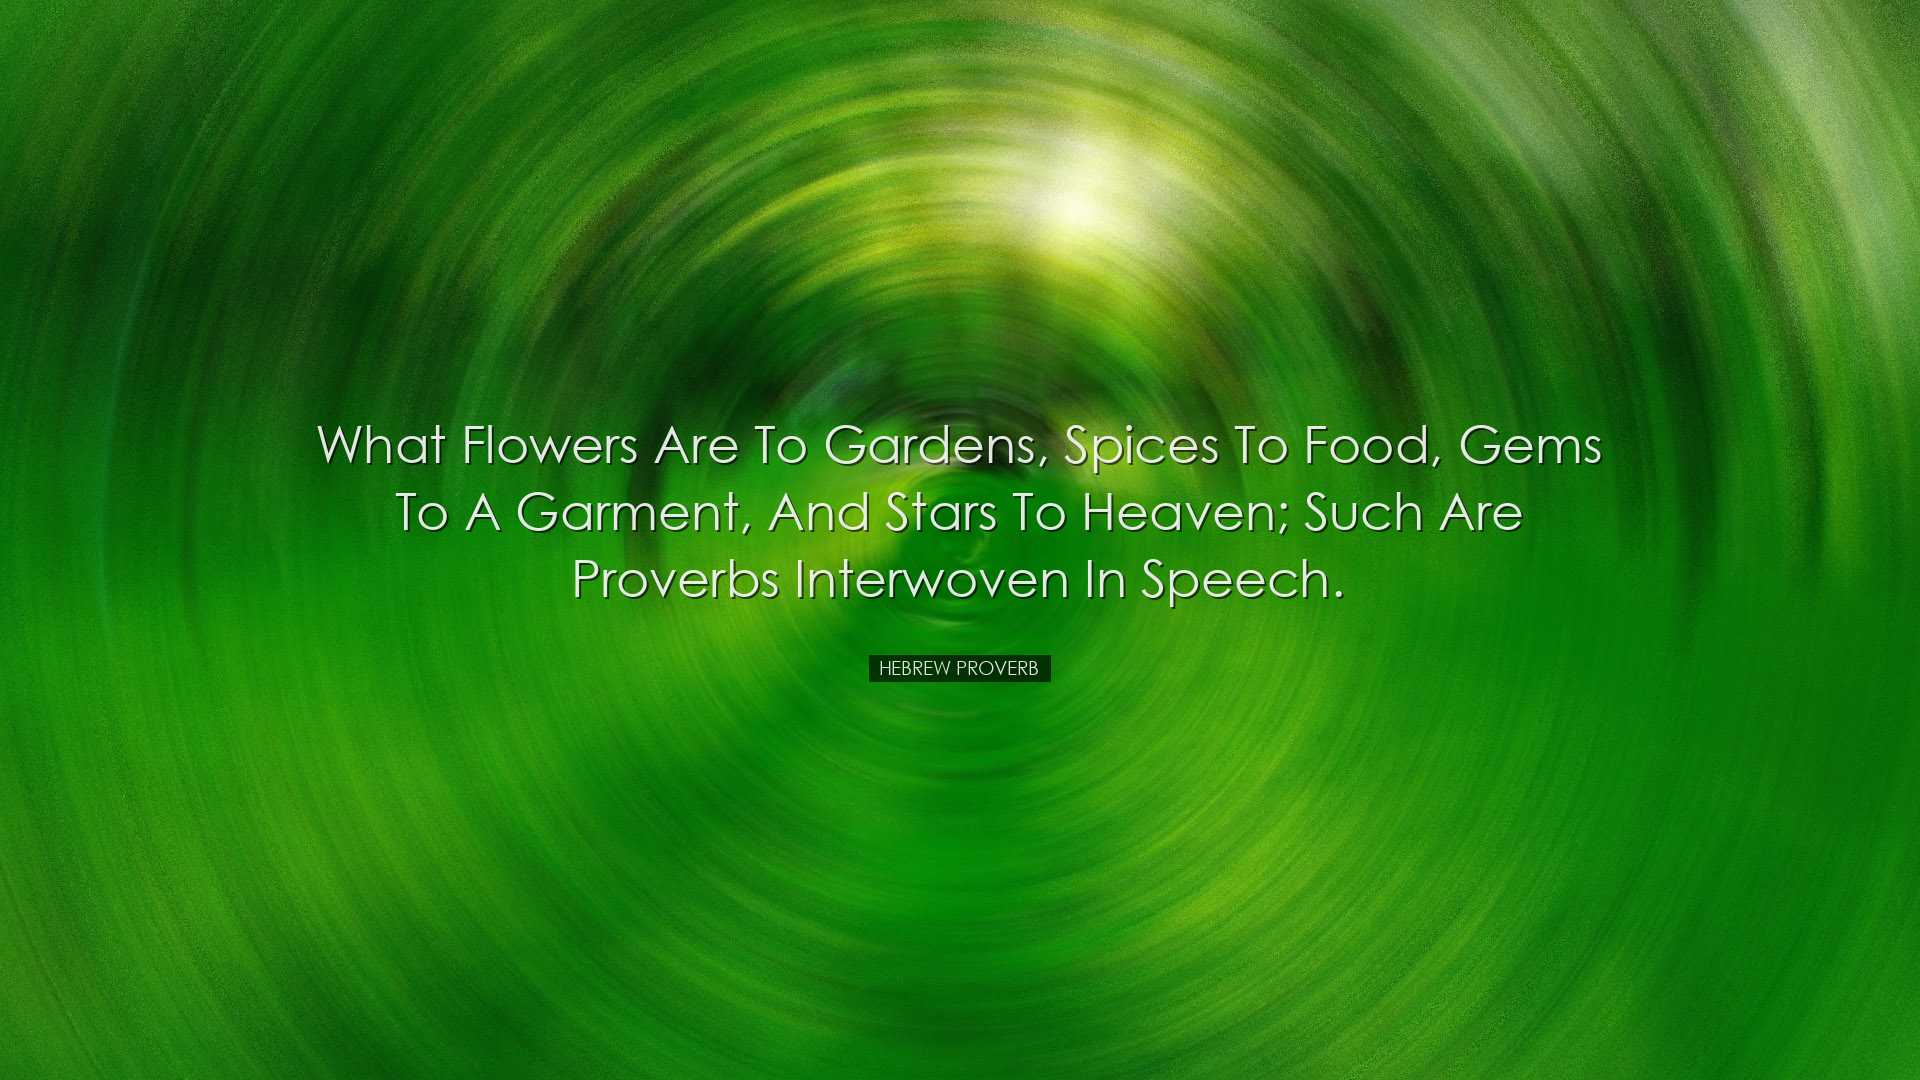 What flowers are to gardens, spices to food, gems to a garment, an